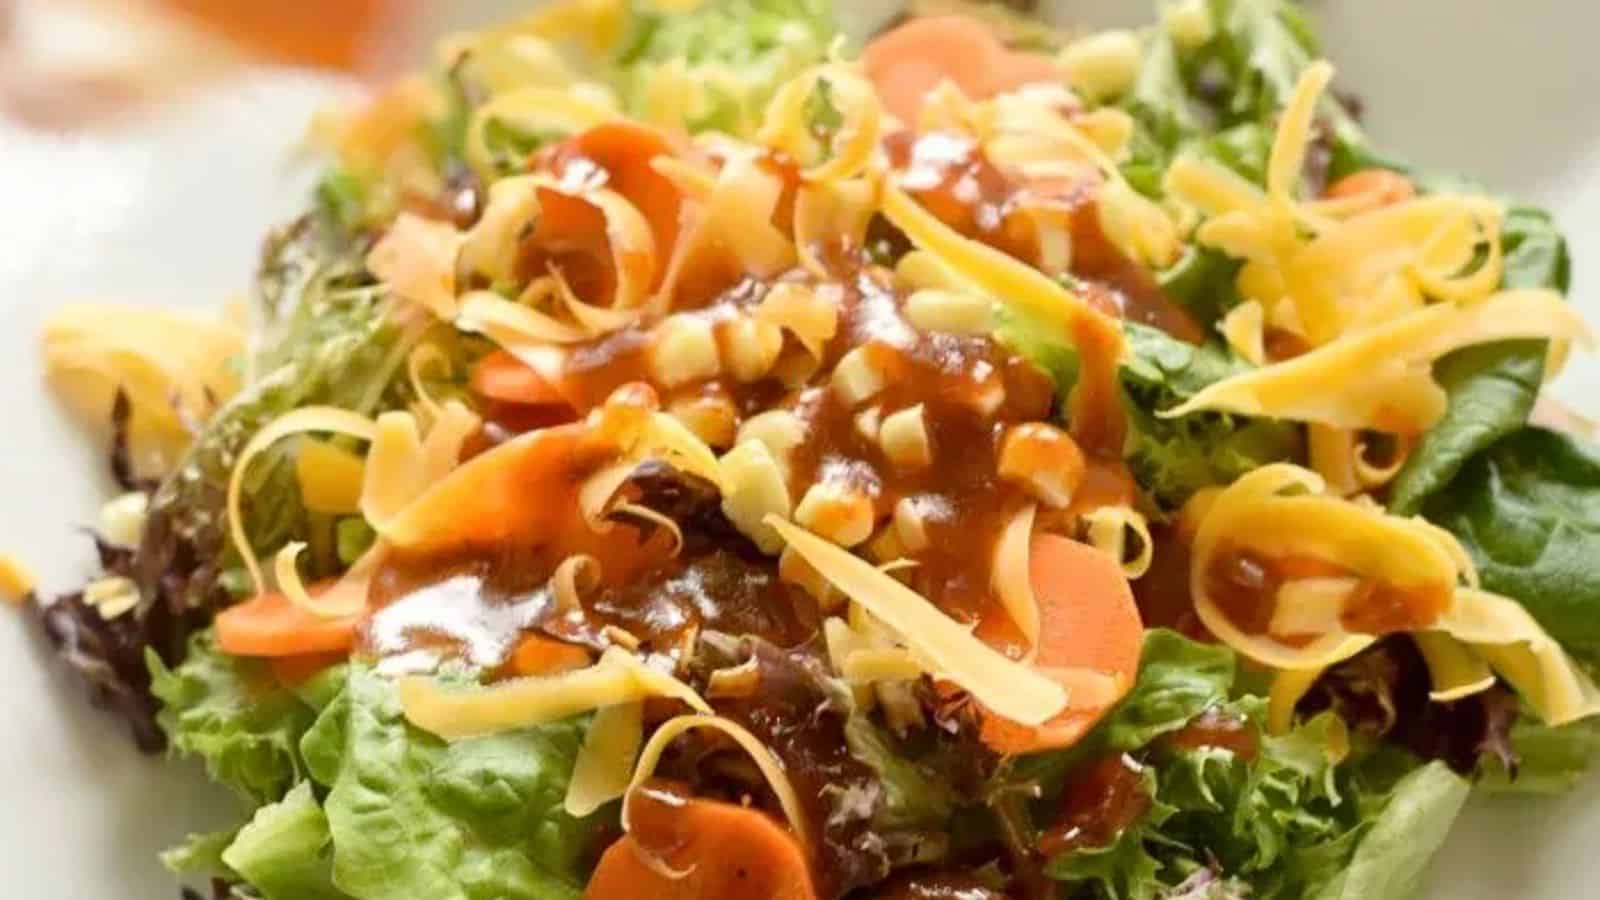 Image shows a closeup of a salad with corn, carrots, cheese, and BBQ Vinaigrette.